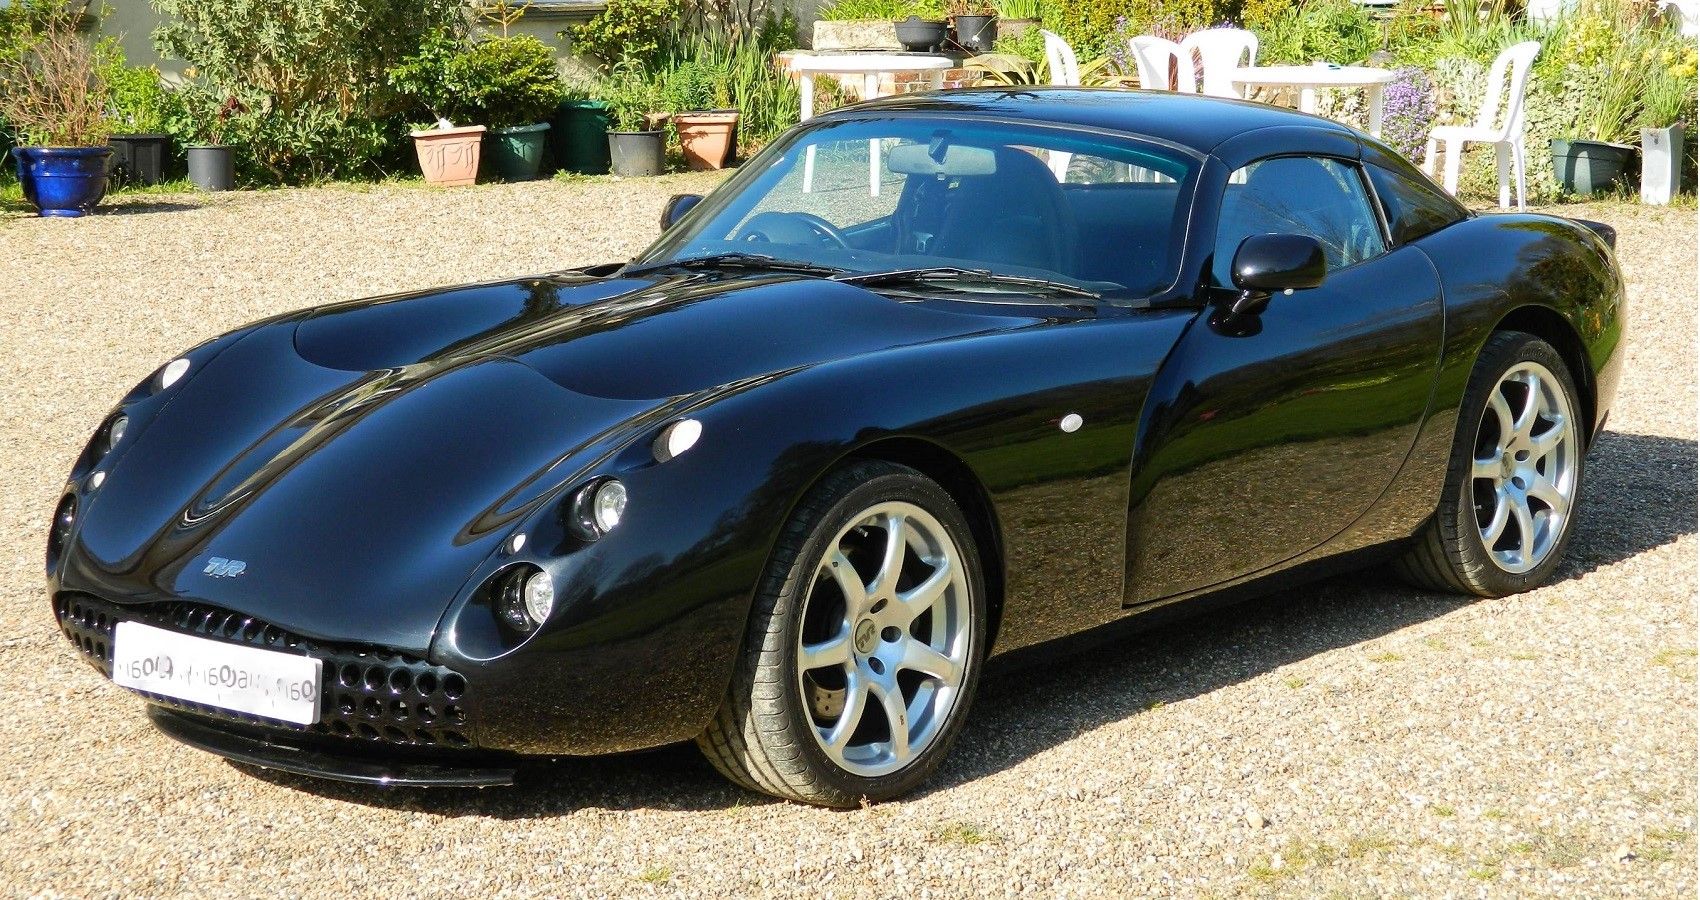 10 Reasons Why We Love The Tvr Tuscan